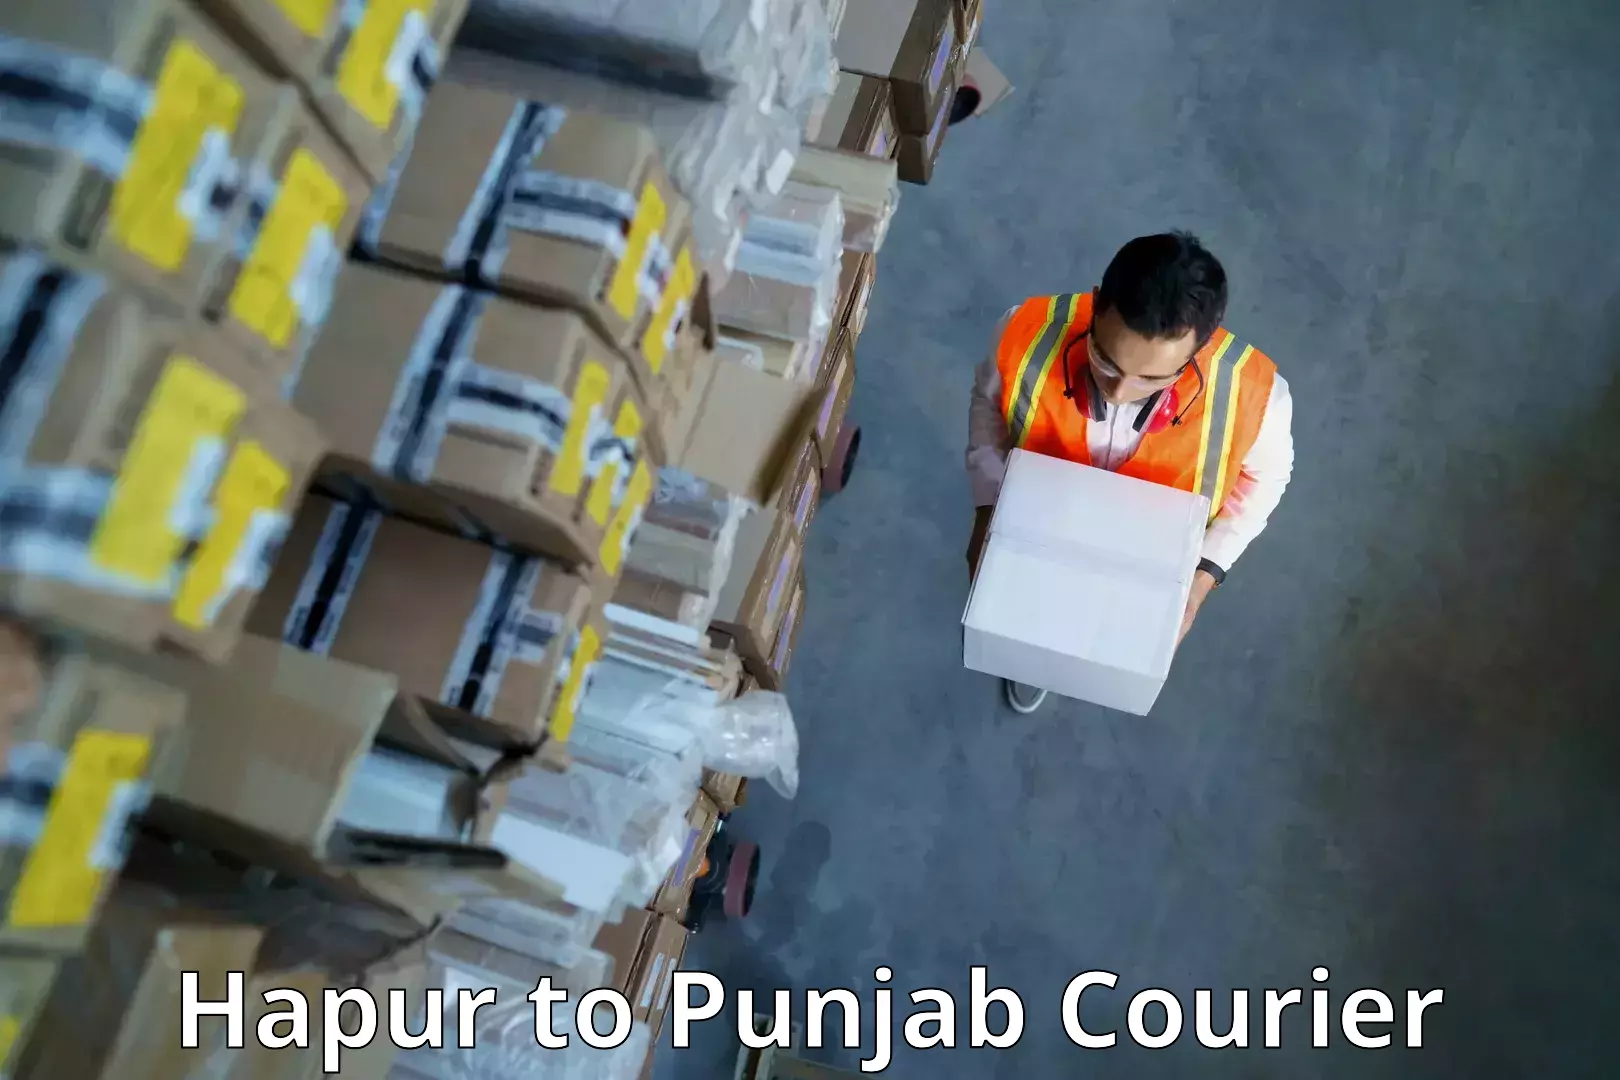 Courier service innovation Hapur to Pathankot